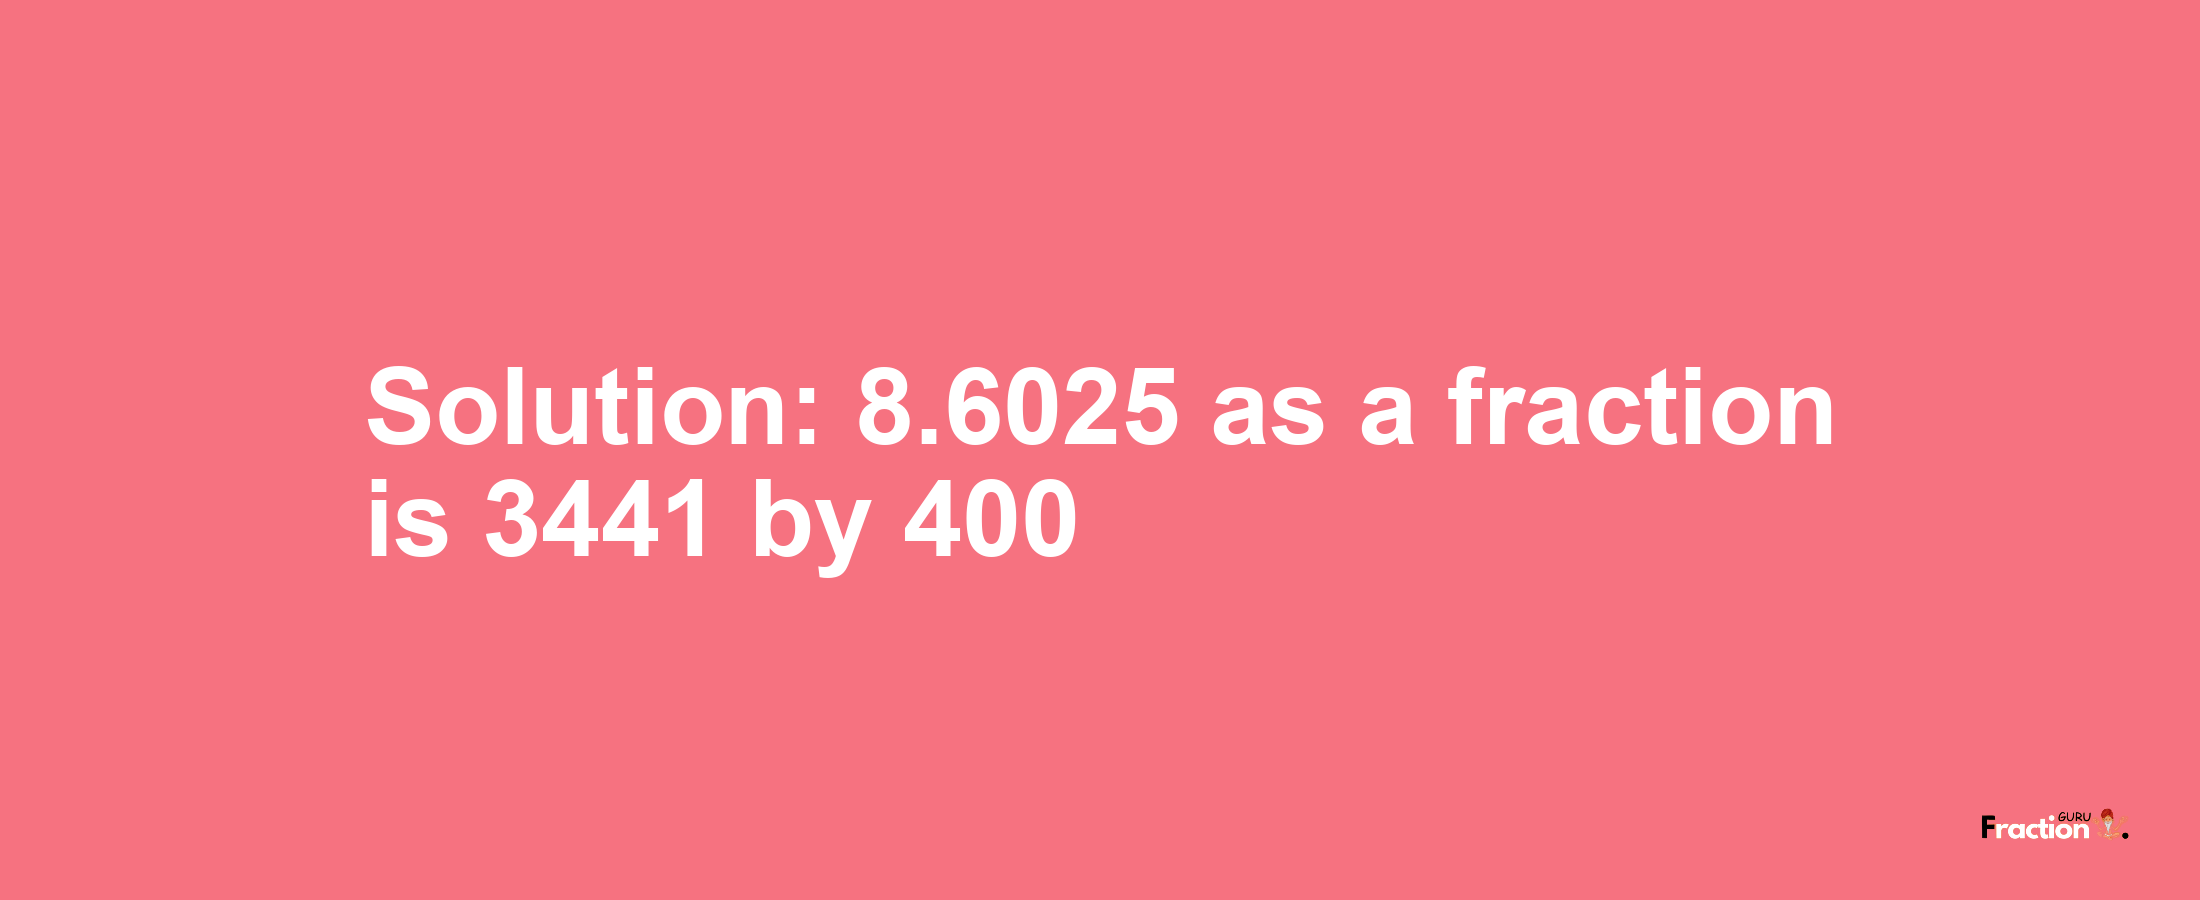 Solution:8.6025 as a fraction is 3441/400